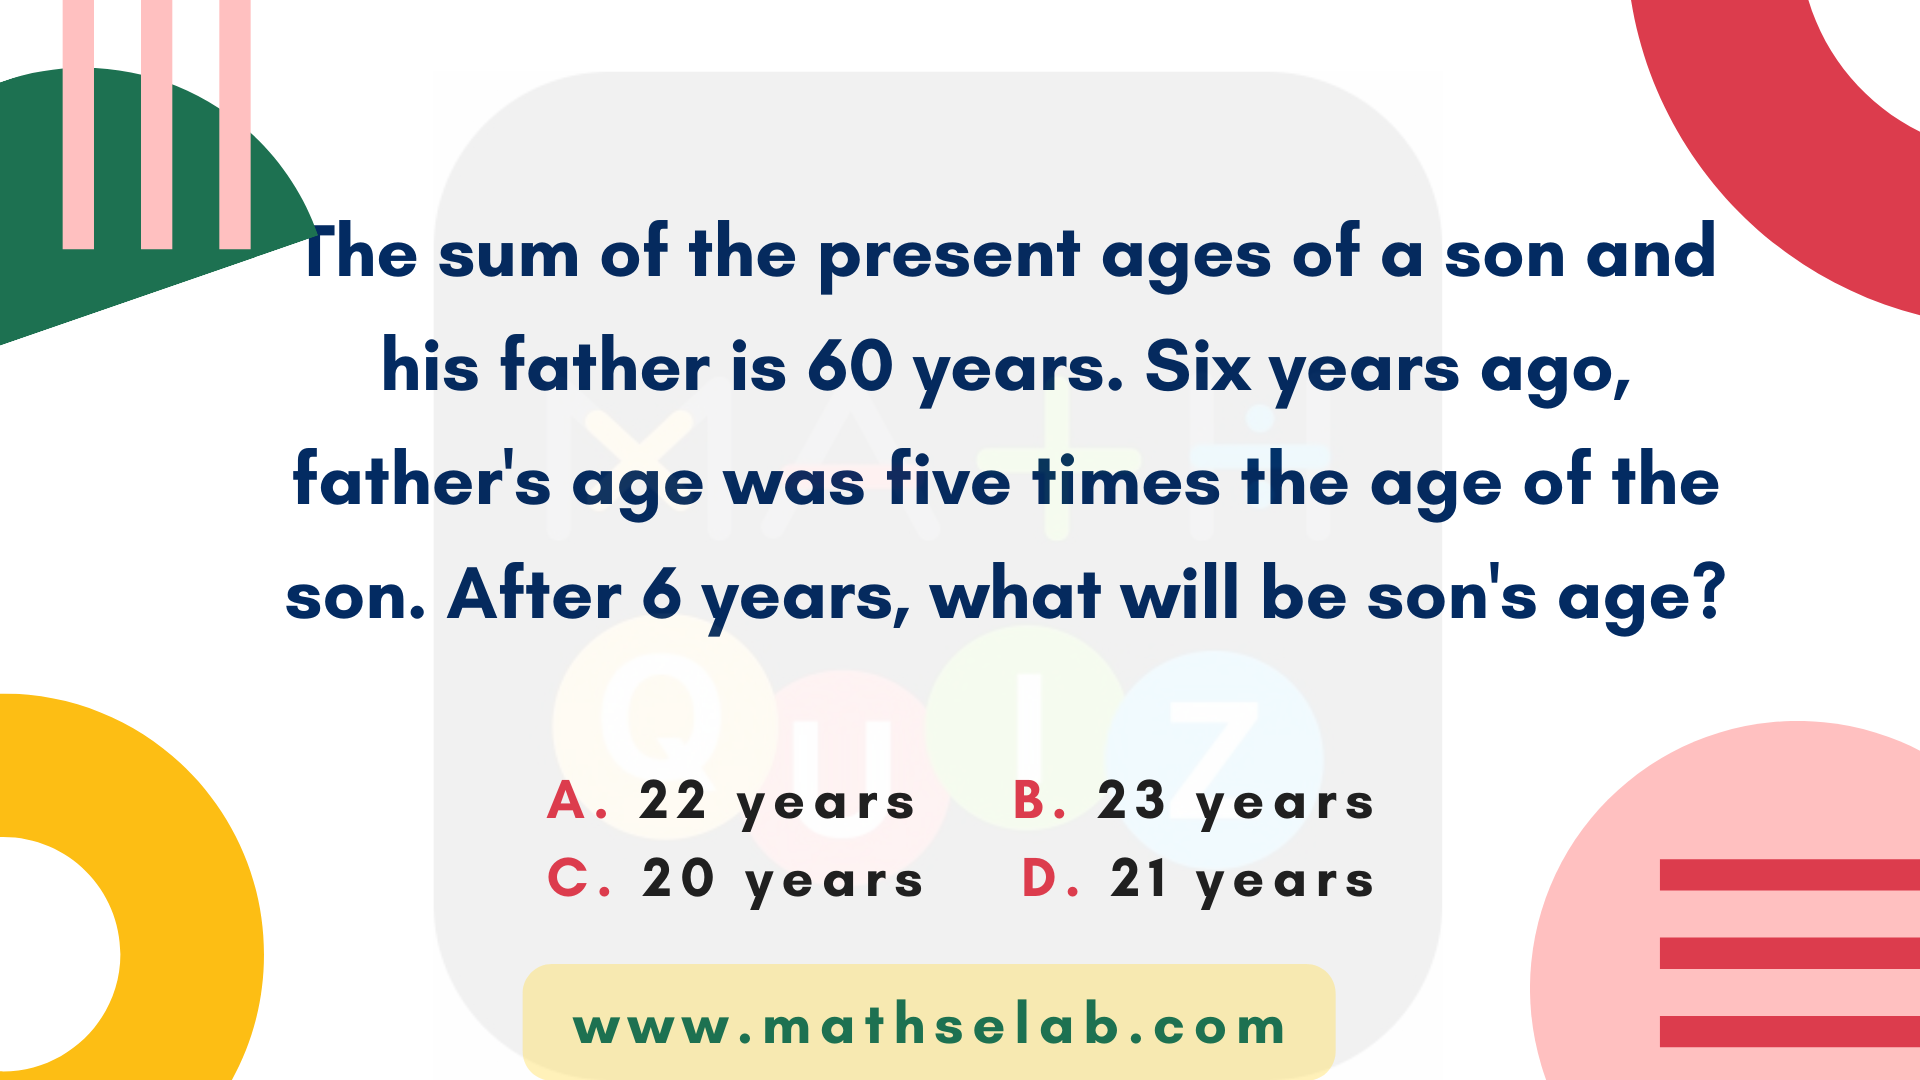 The sum of the present ages of a son and his father is 60 years. Six years ago, father's age was five times the age of the son. After 6 years, what will be son's age?